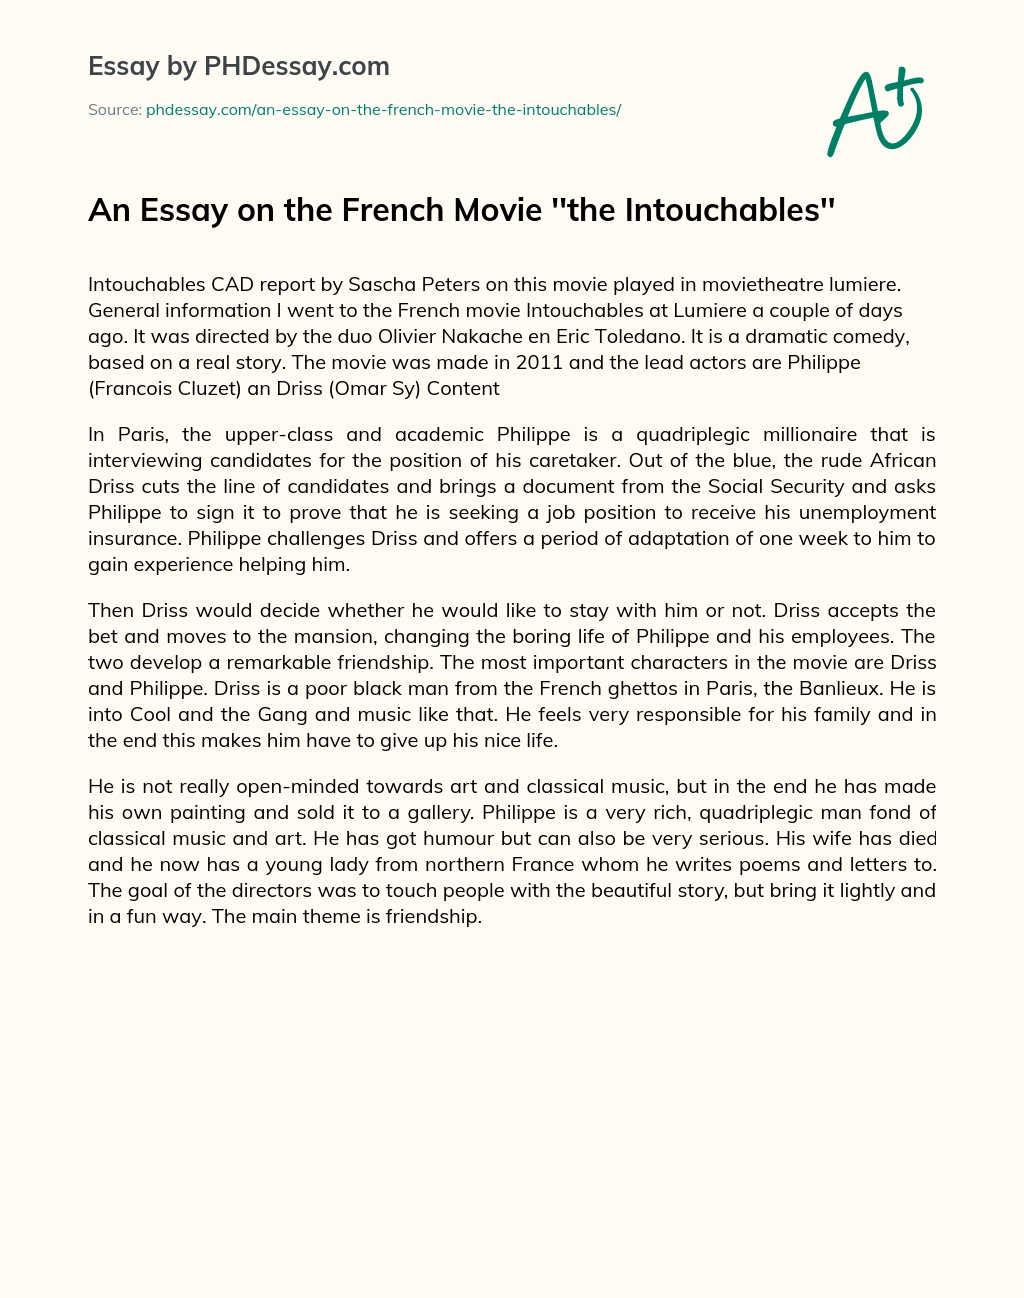 An Essay on the French Movie ”the Intouchables” essay